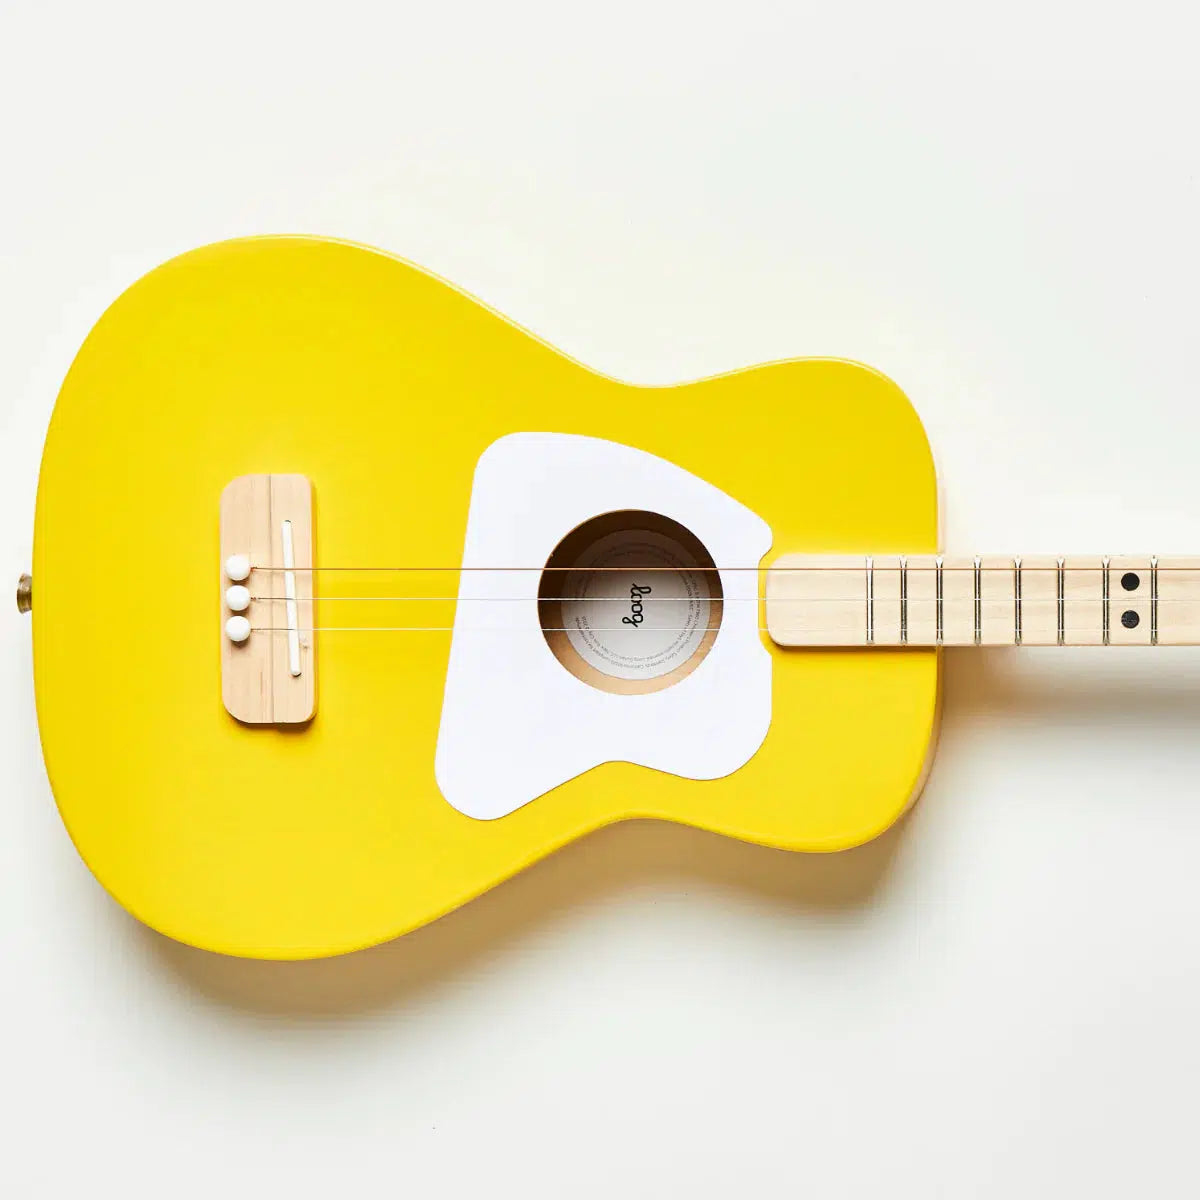 Front view of the yellow acoustic guitar against a white background.